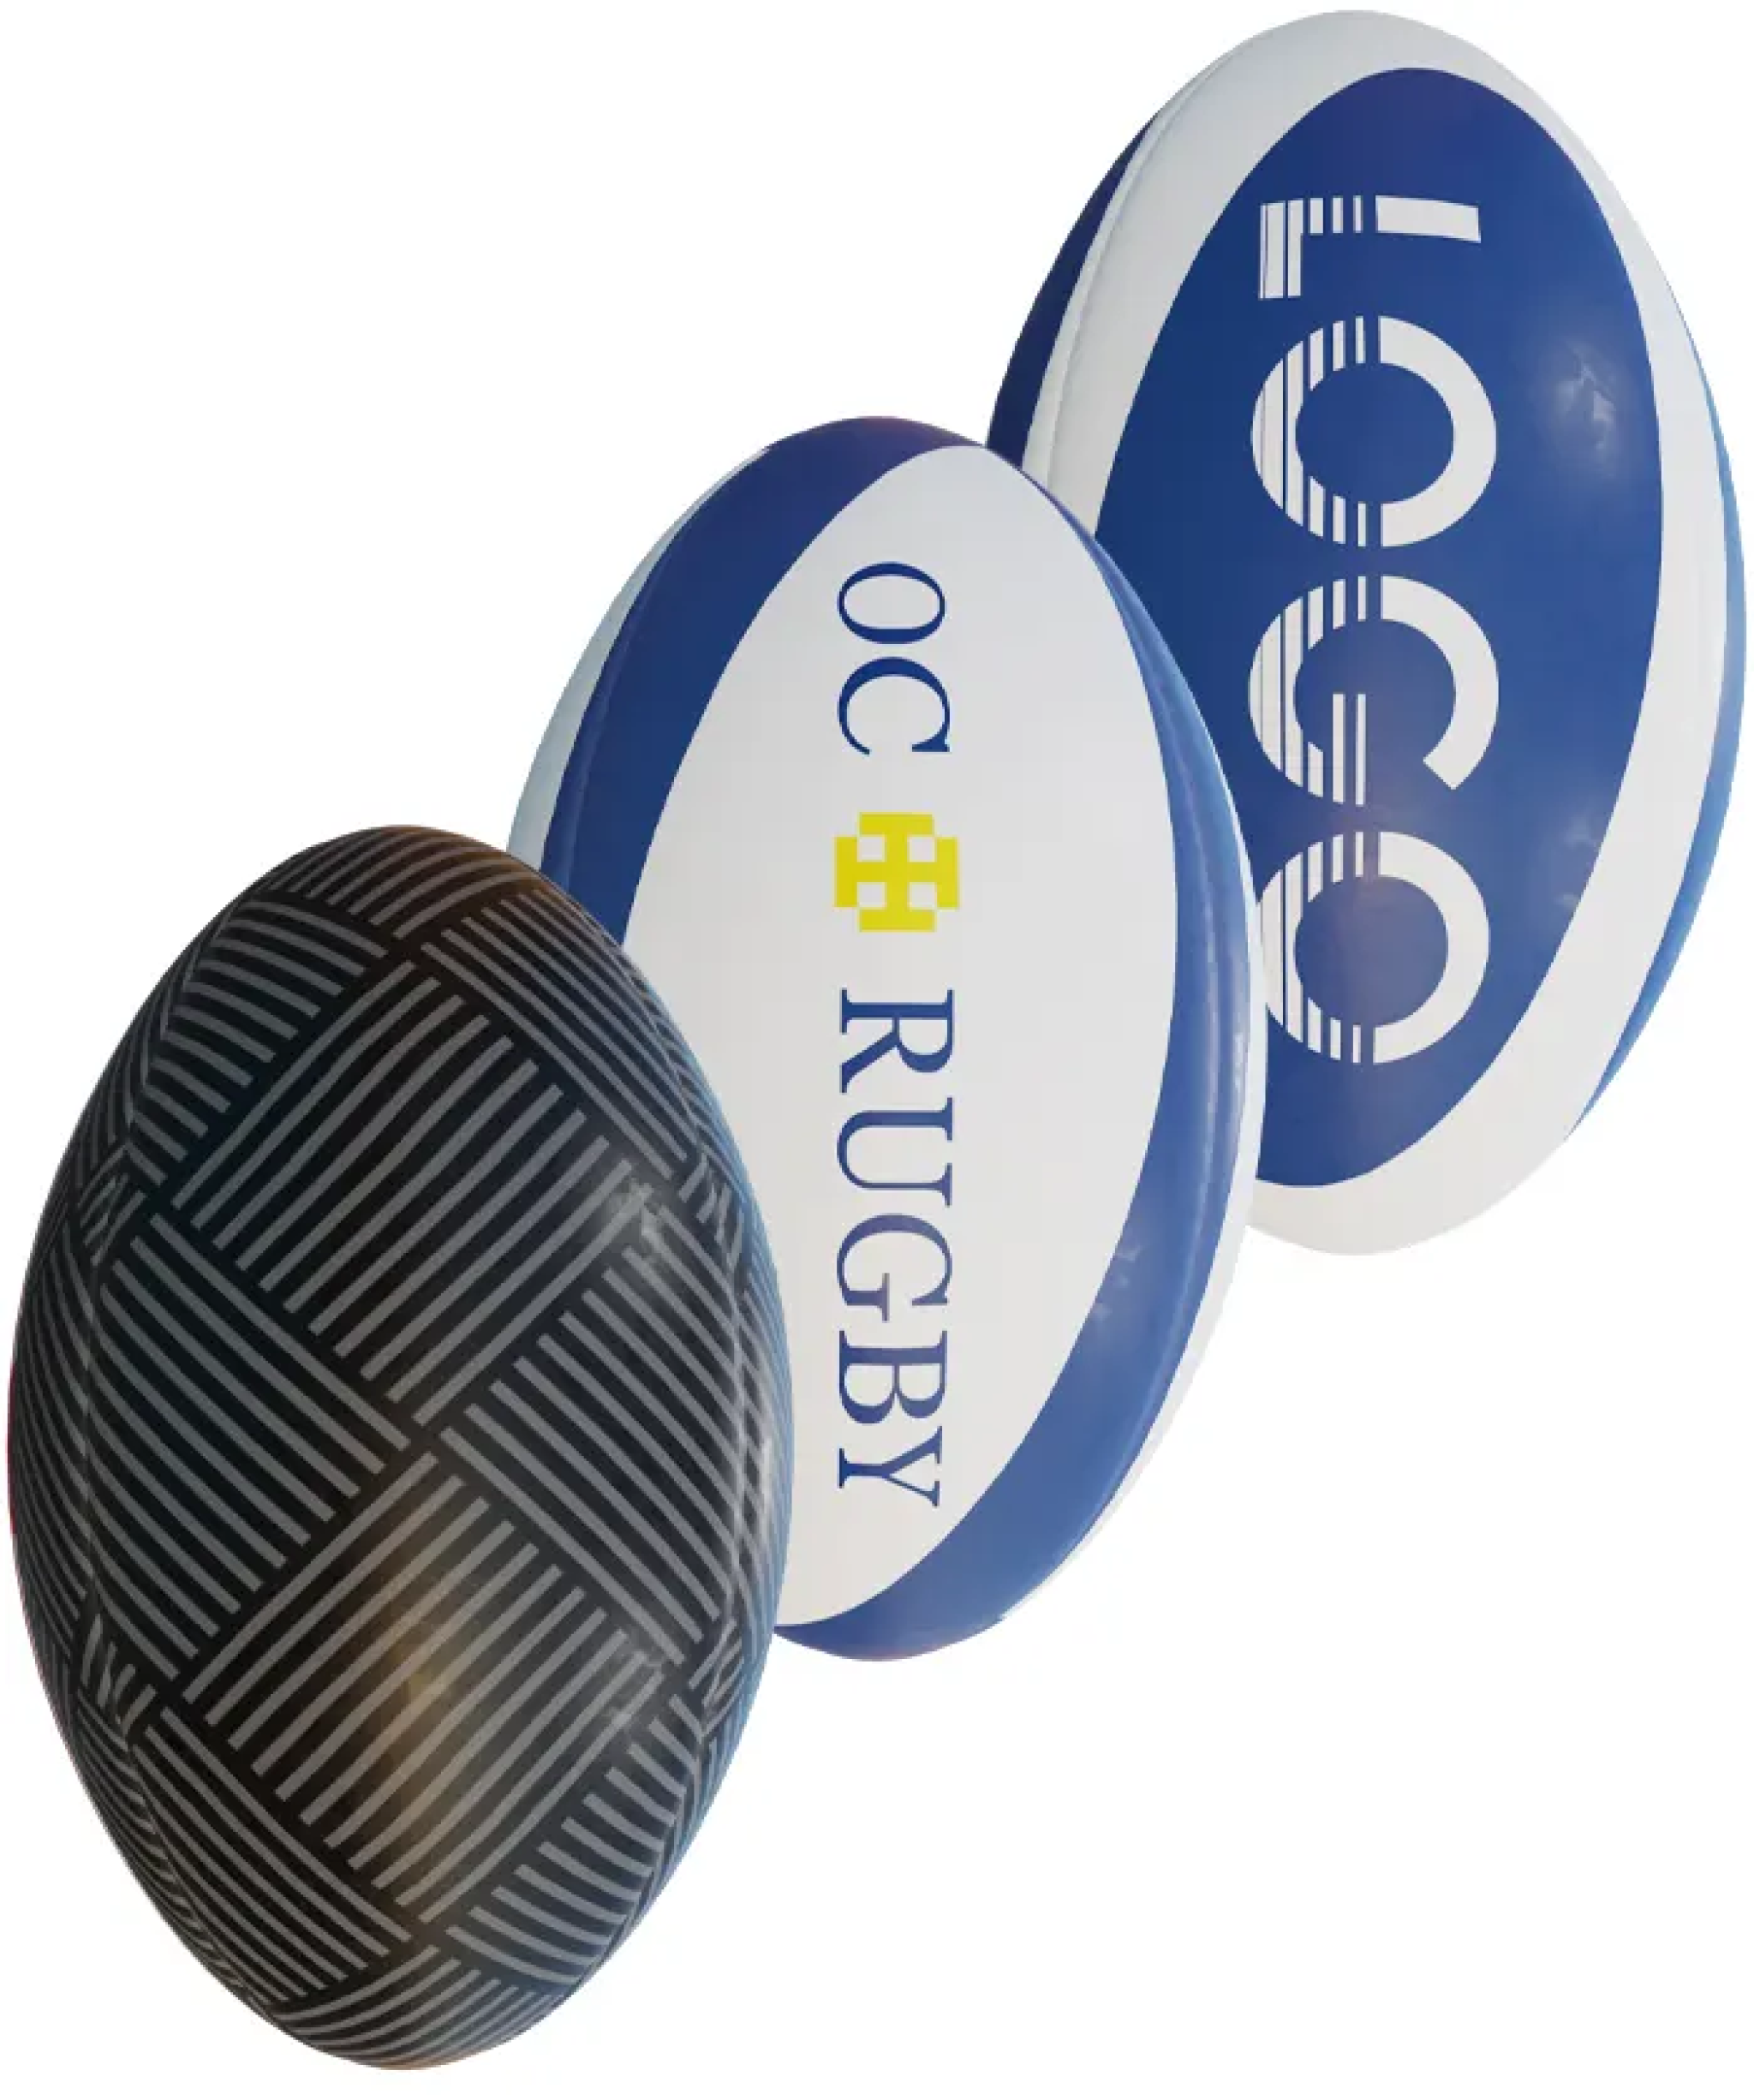 match ready rugby ball.png